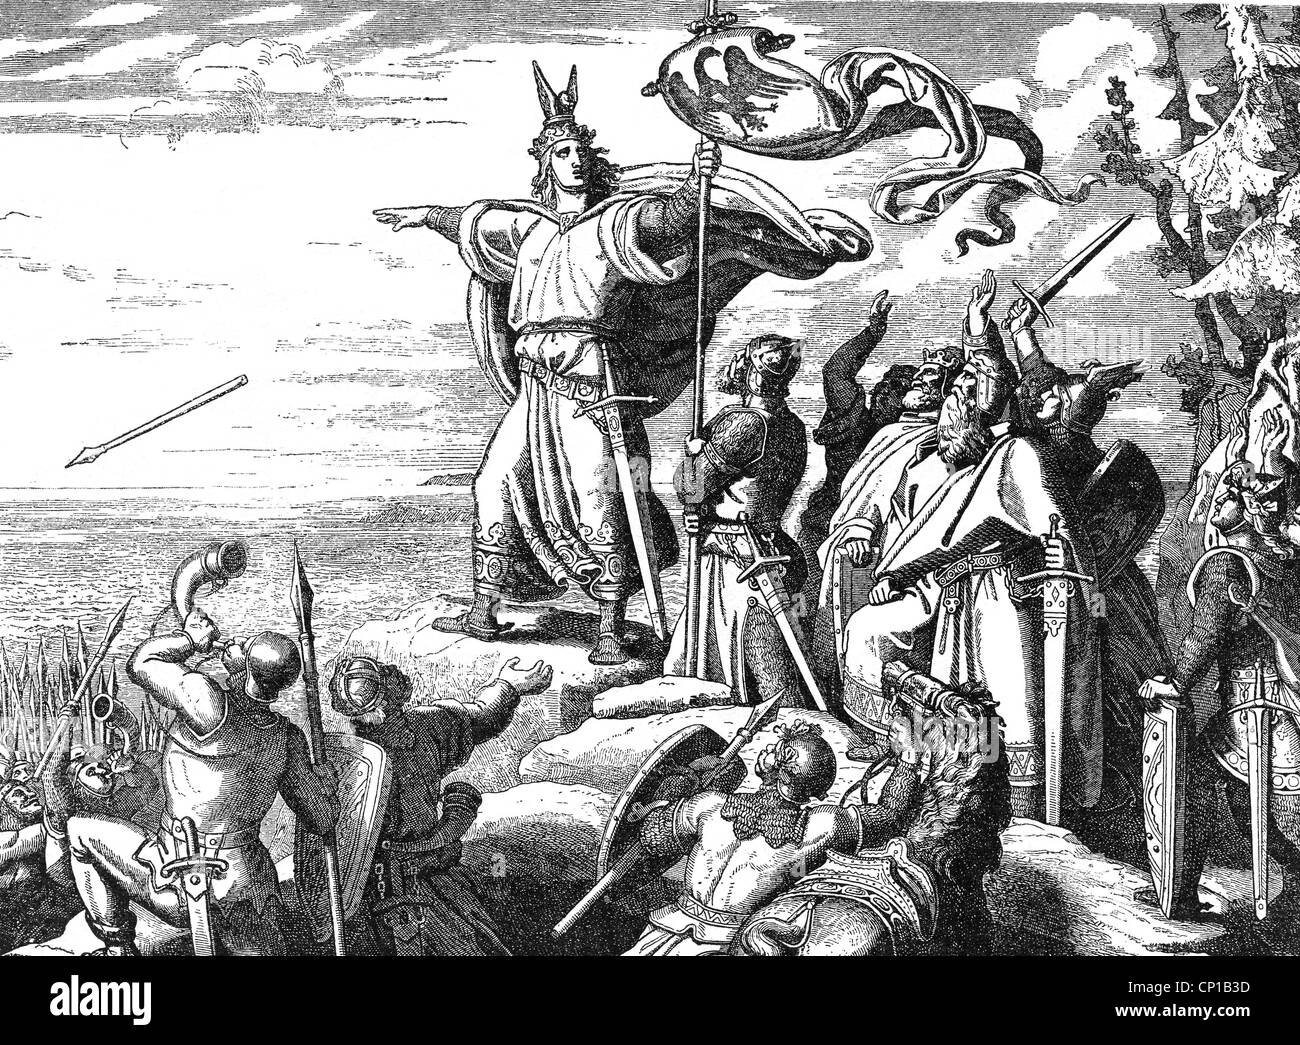 Otto I 'the Great', 23.11.912 - 7.5.973, Holy Roman Emperor 2.2.962 - 7.5.973, at the Otte Sound, 947, wood engraving after drawing by Anton Dietrich, 19th century, , Stock Photo